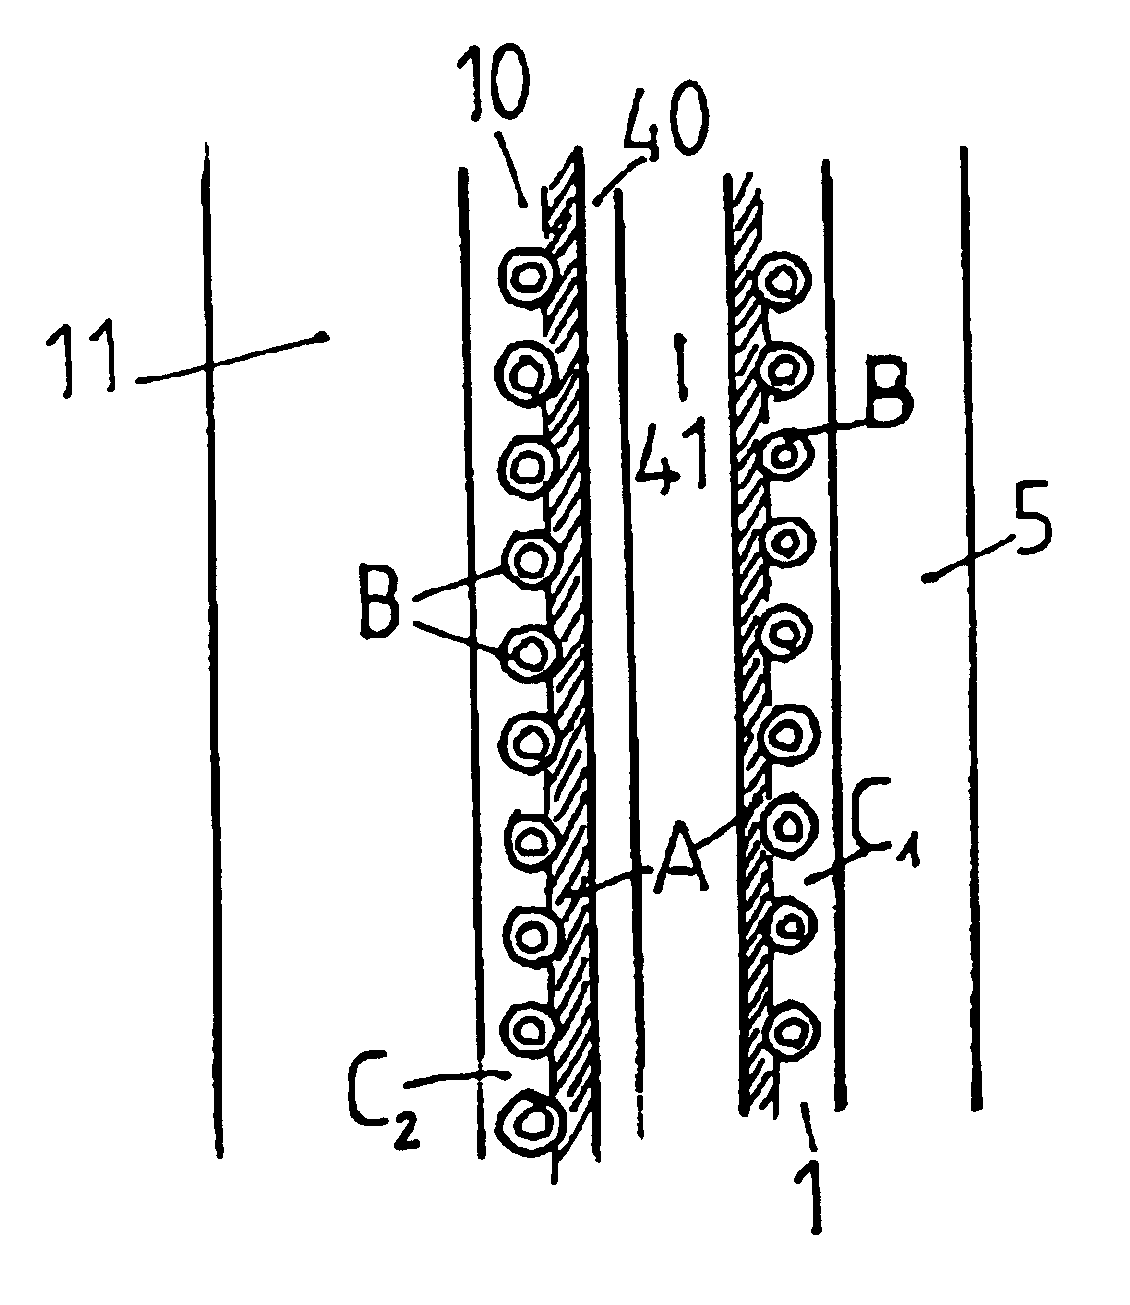 Tire with specified reinforcing ply